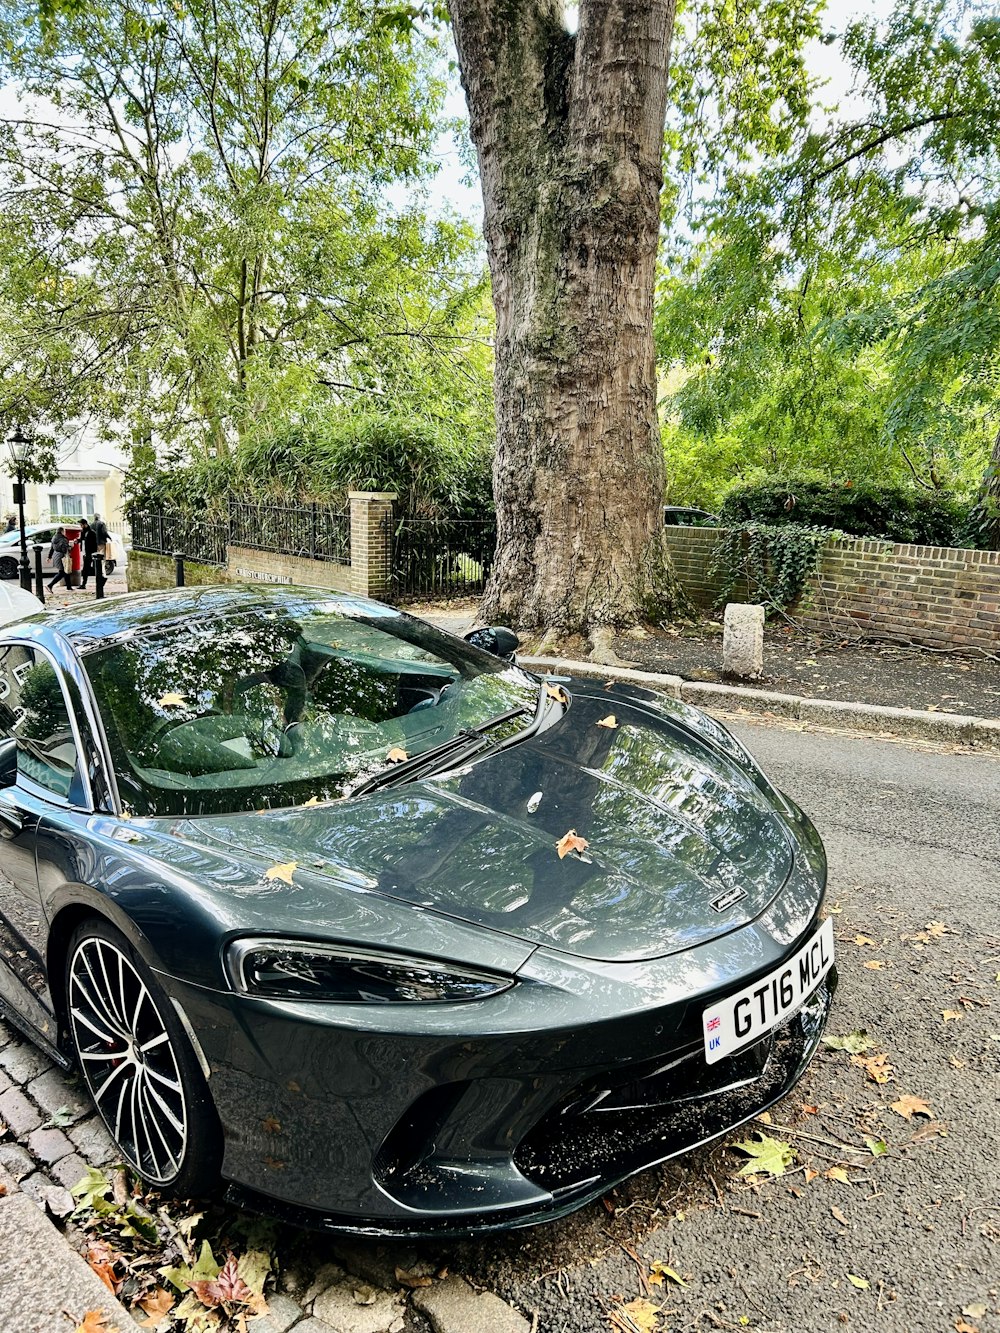 a black sports car parked on the side of the road